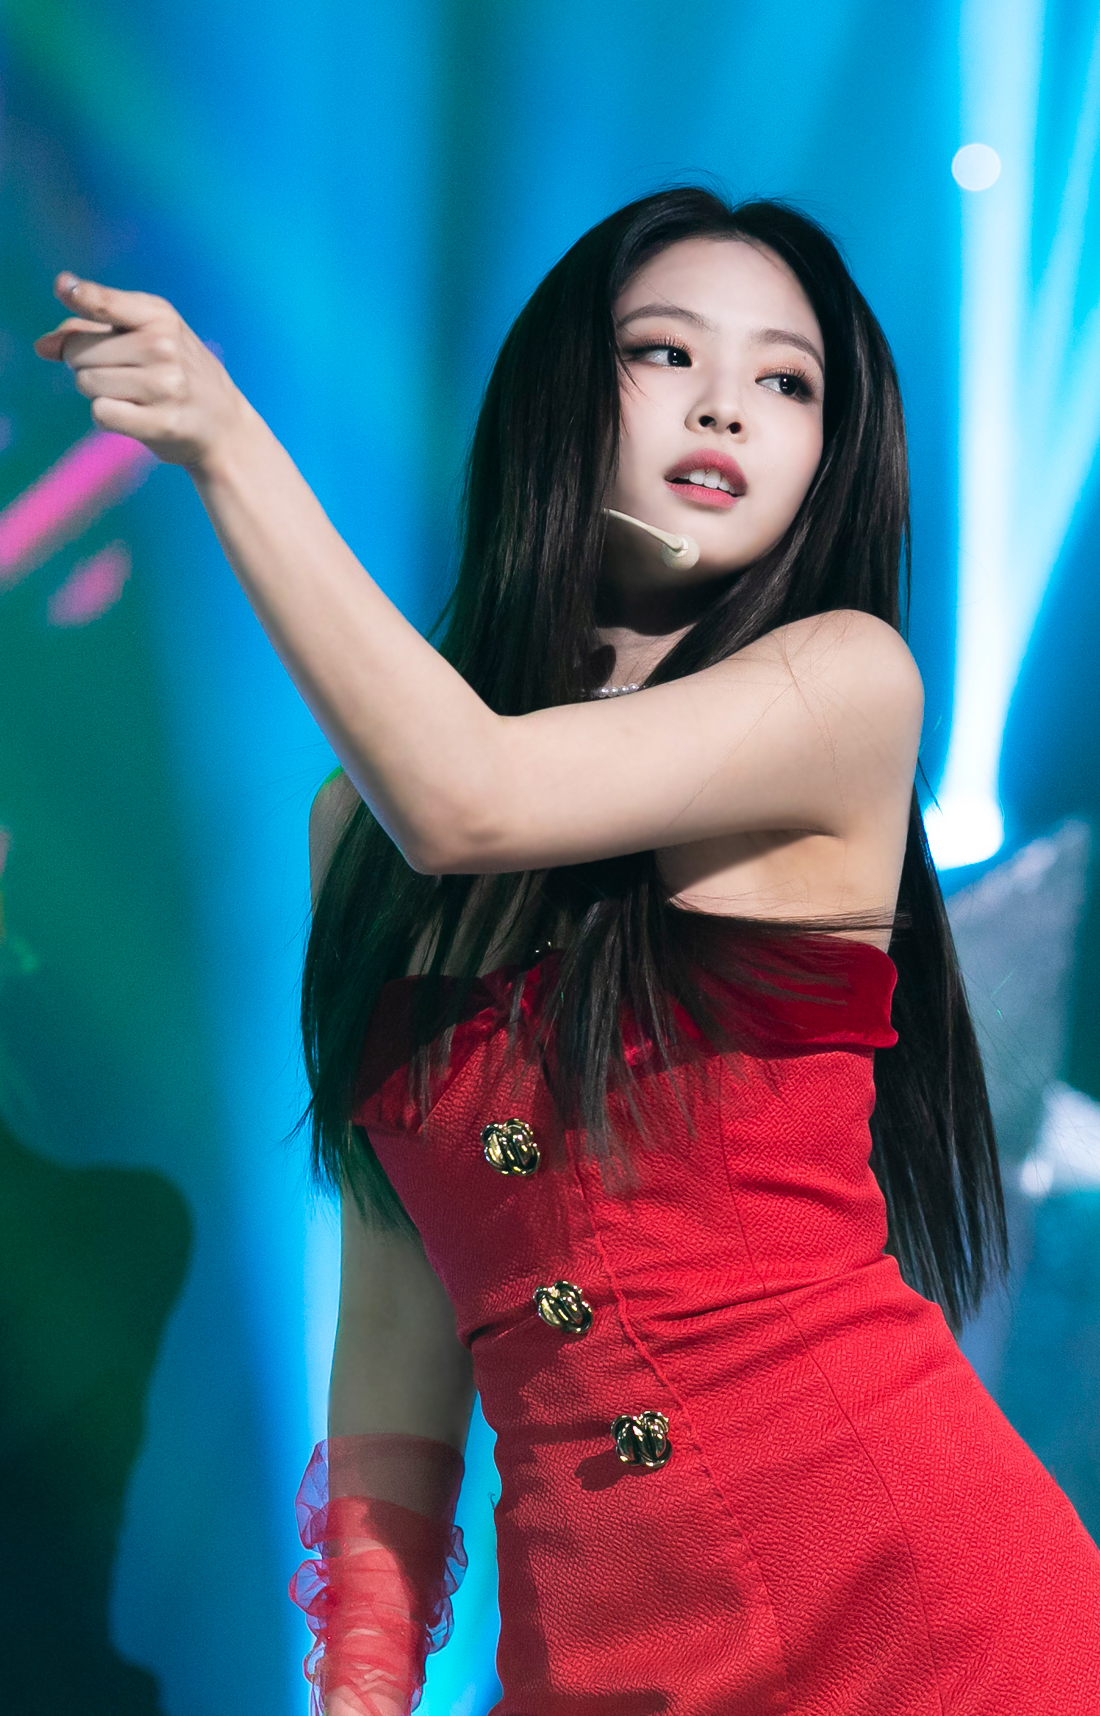 Jennie’s “SOLO” Outfits Allegedly Handpicked By Yang Hyun Suk, Netizens ...